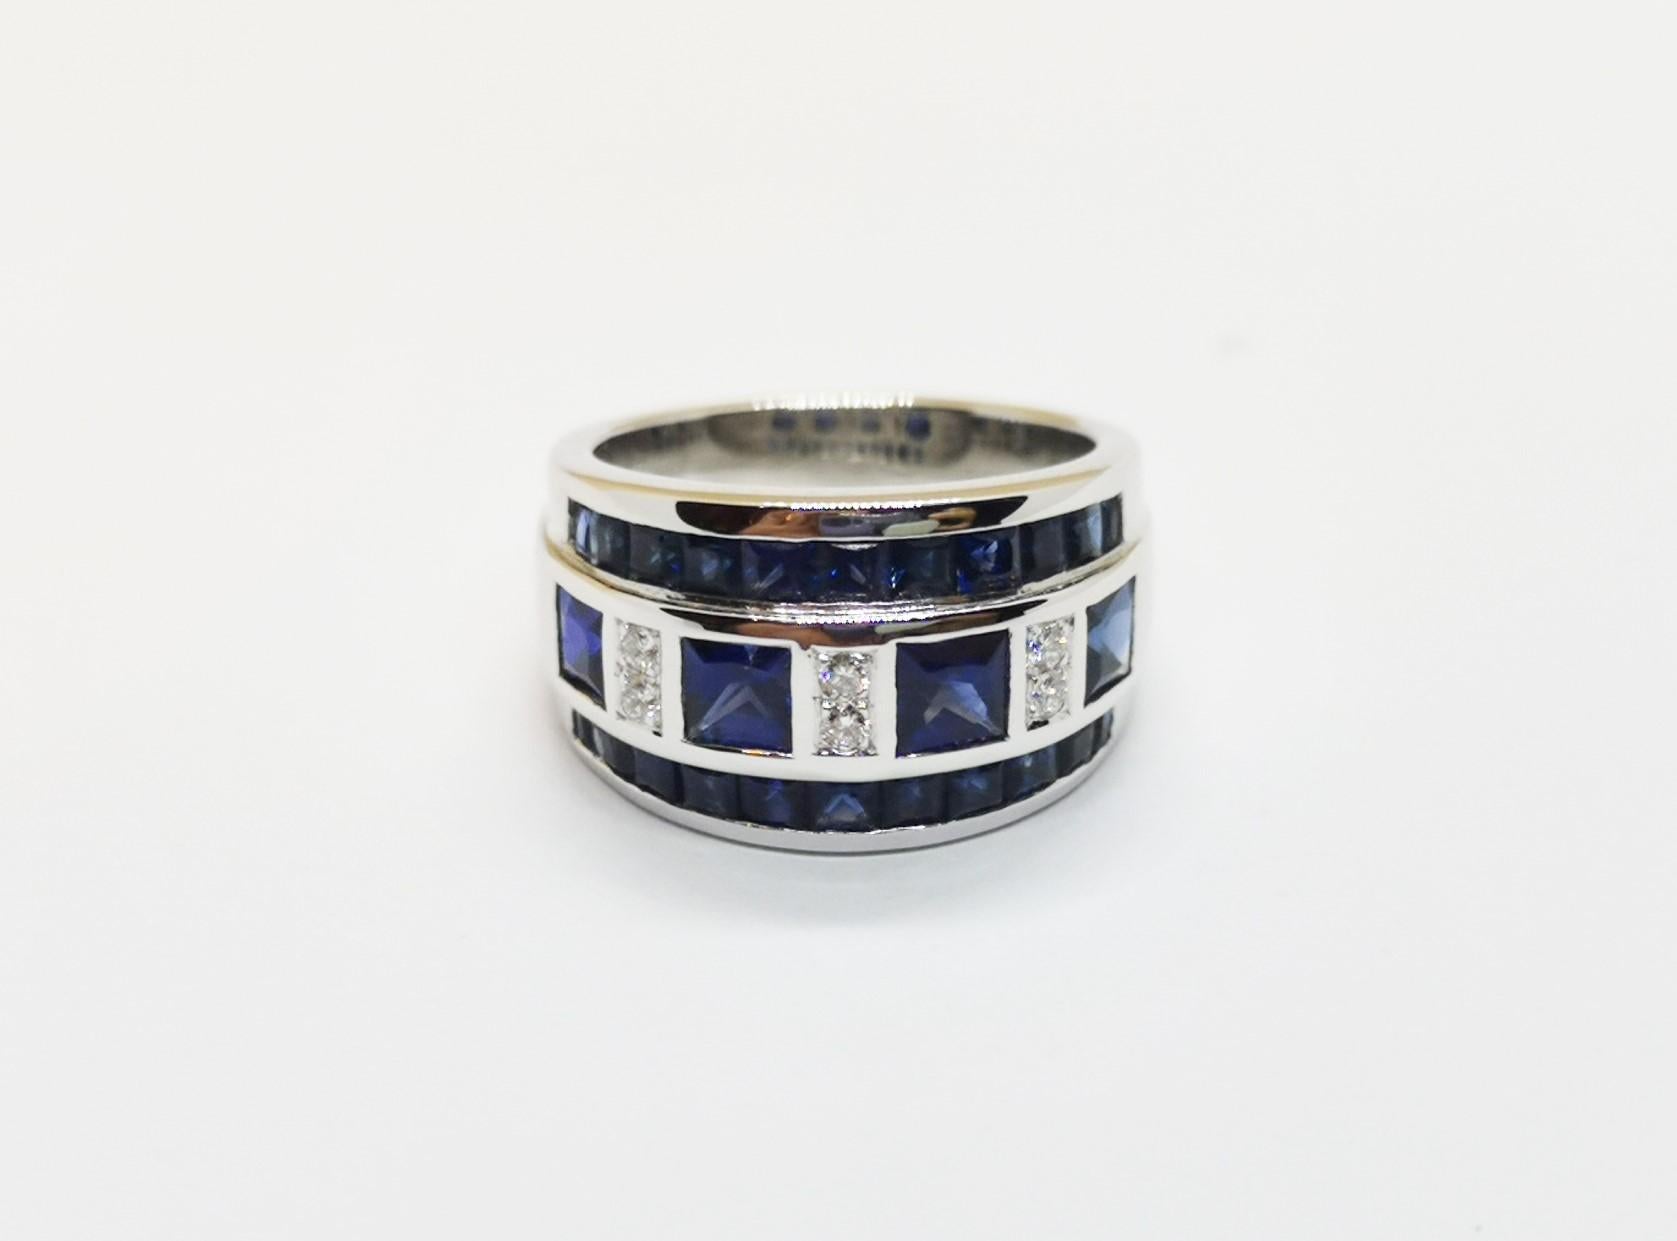 Blue Sapphire 2.89 carats with Diamond 0.10 carat Ring set in 18 Karat White Gold Settings

Width: 2.0 cm
Length: 1.1 cm 
Ring Size: 54

